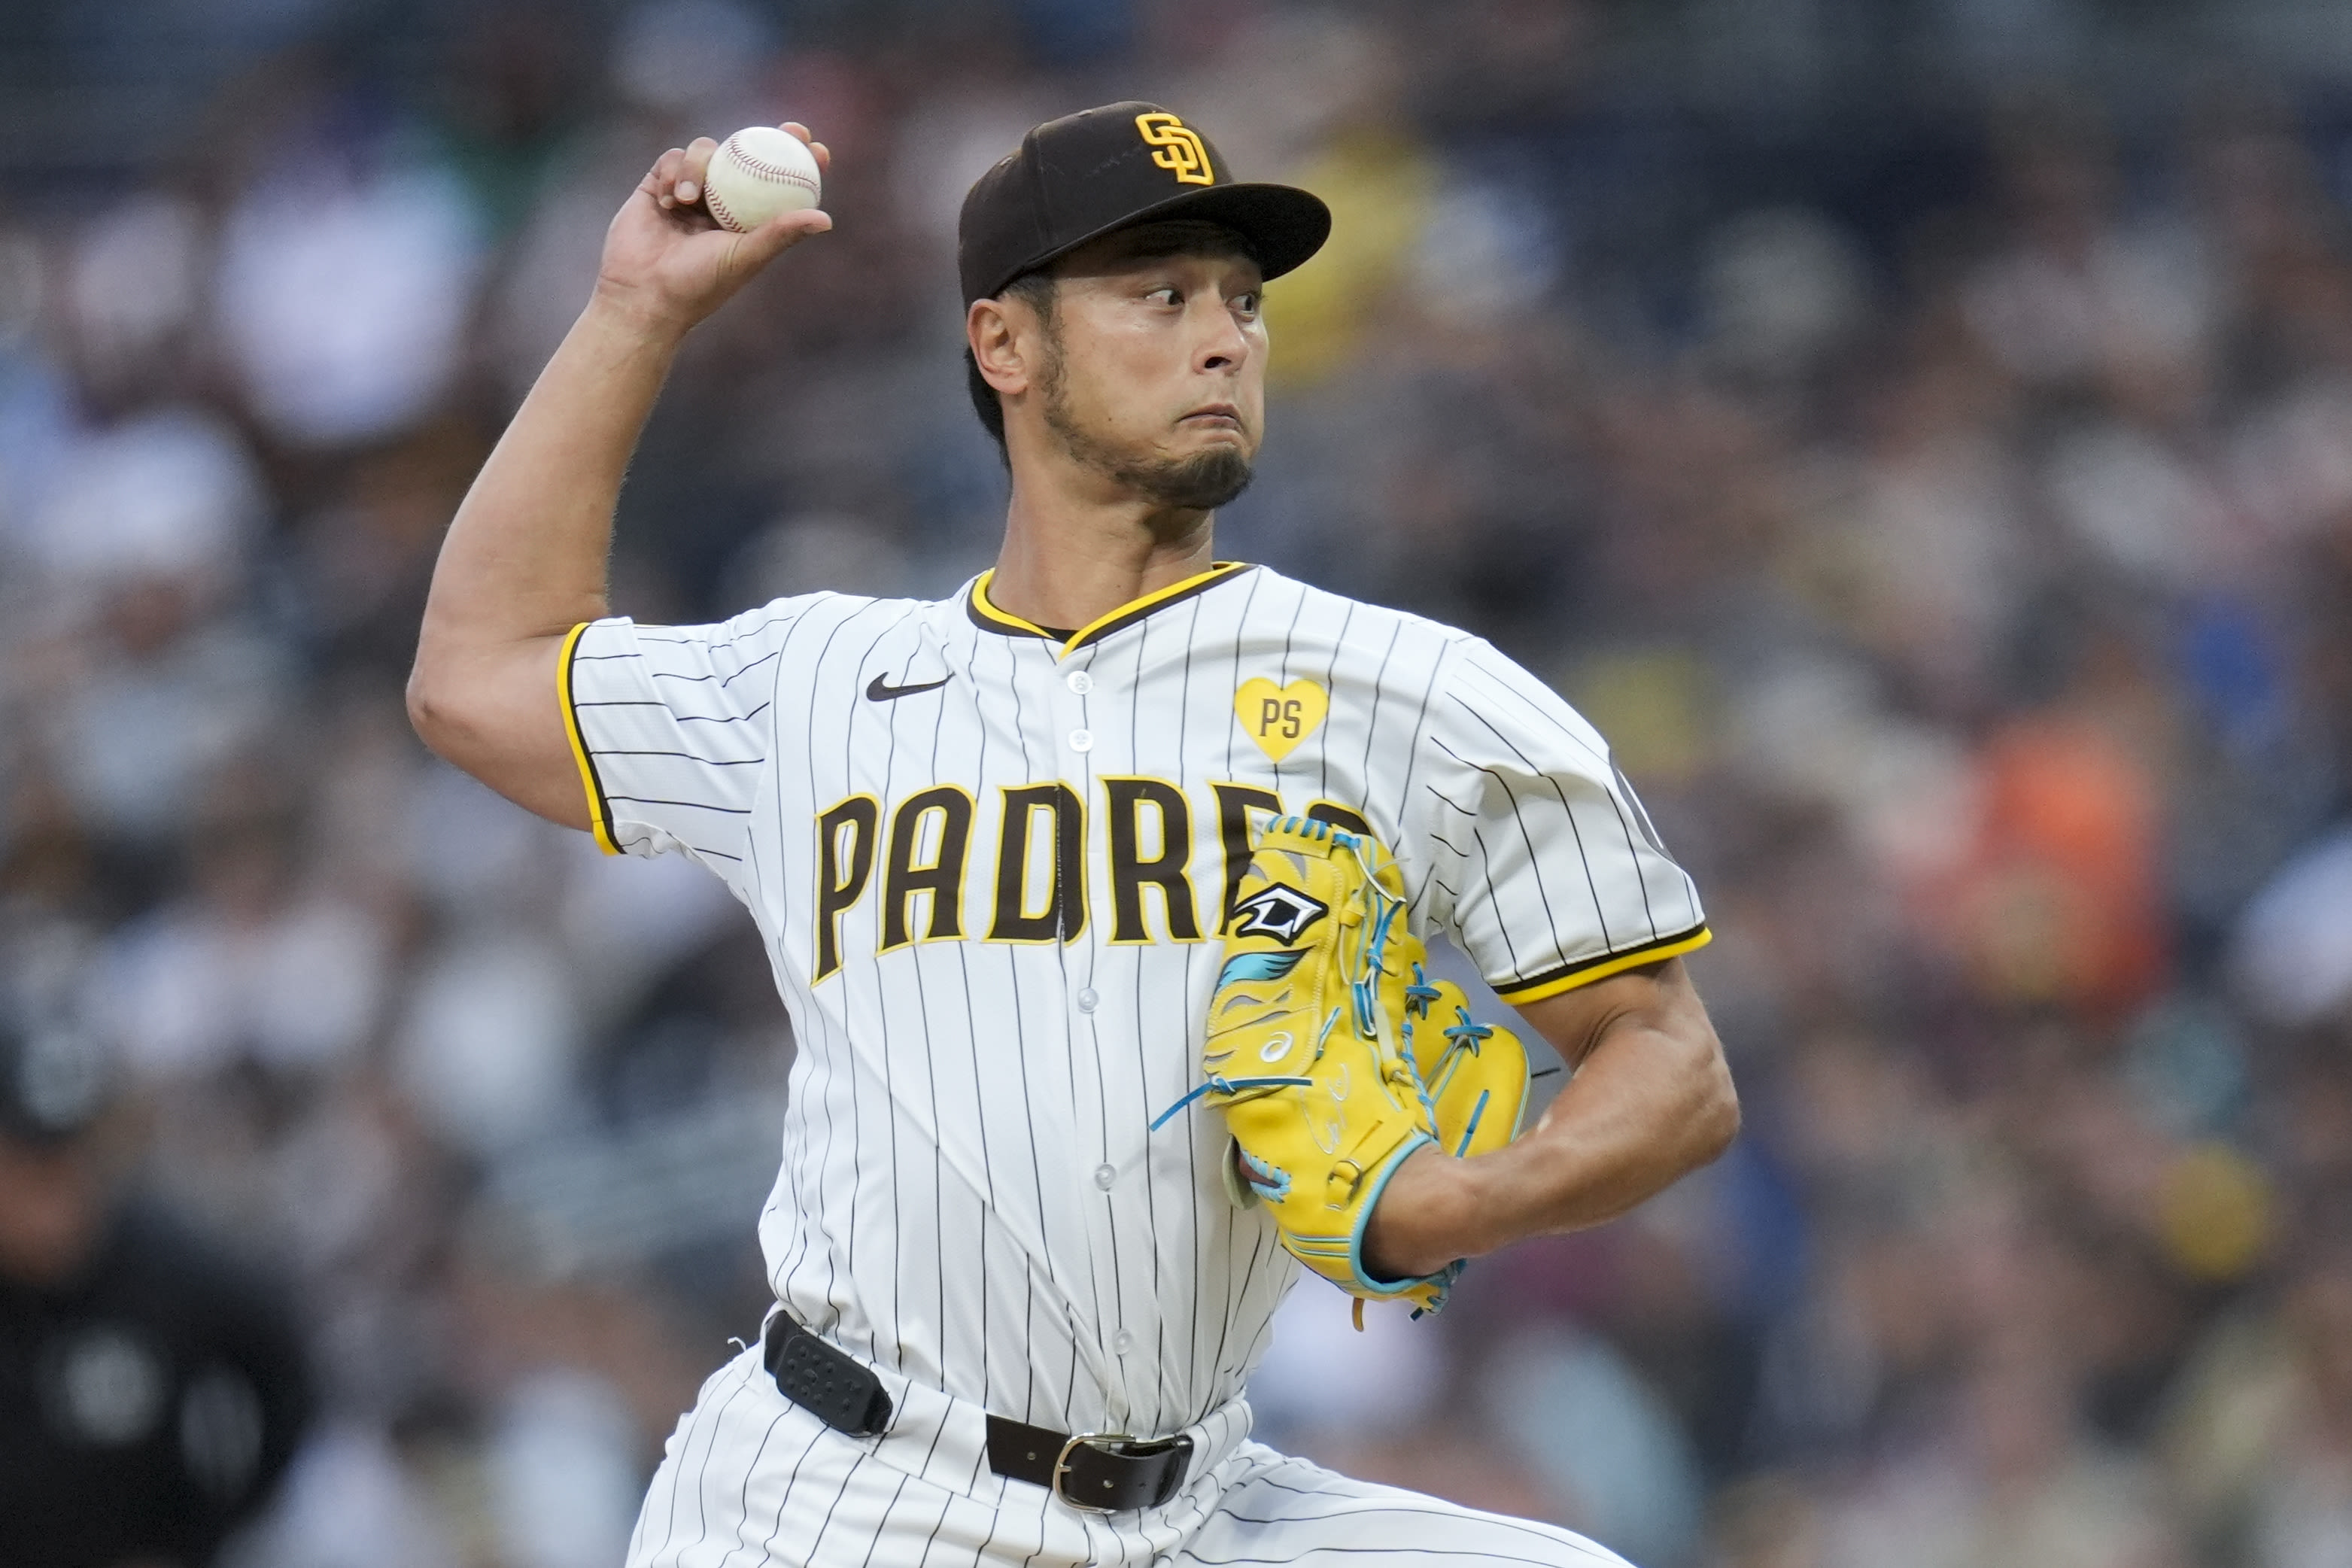 Darvish earns 1st win of season and Machado hits 3-run double as Padres defeat Reds 6-4